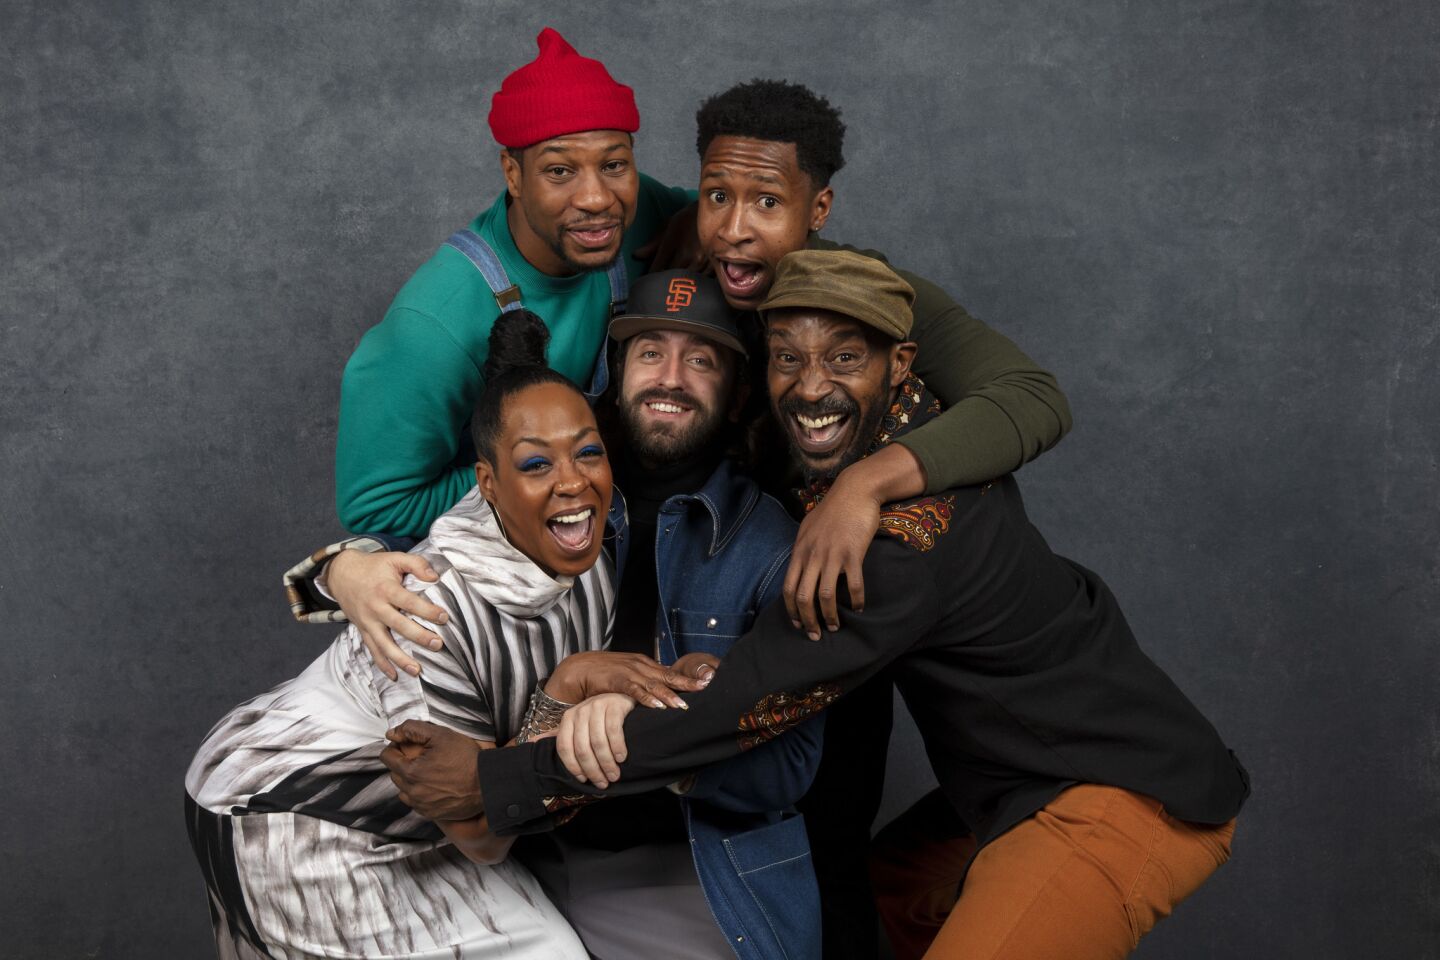 Actors Tichina Arnold and Jonathan Majors, director Joe Talbot, subject Jimmie Fails, and actor Rob Morgan, from the film "The Last Black Man in San Francisco."